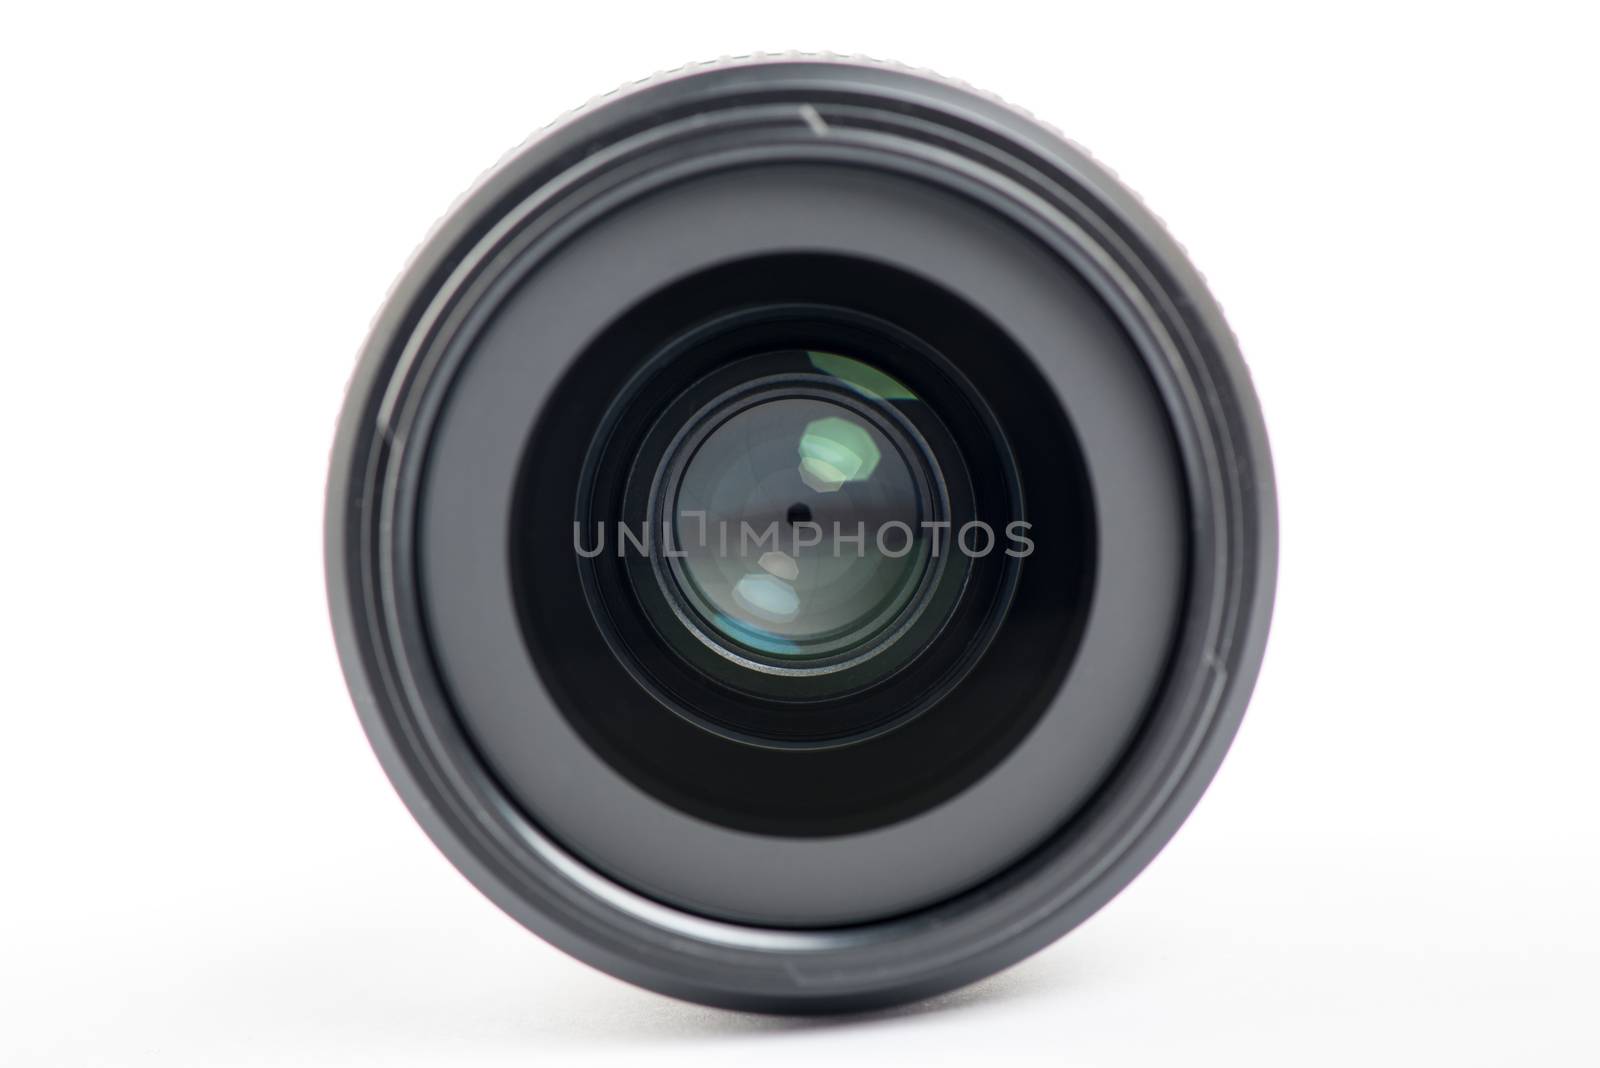 Front close-up of a camera lens on white background